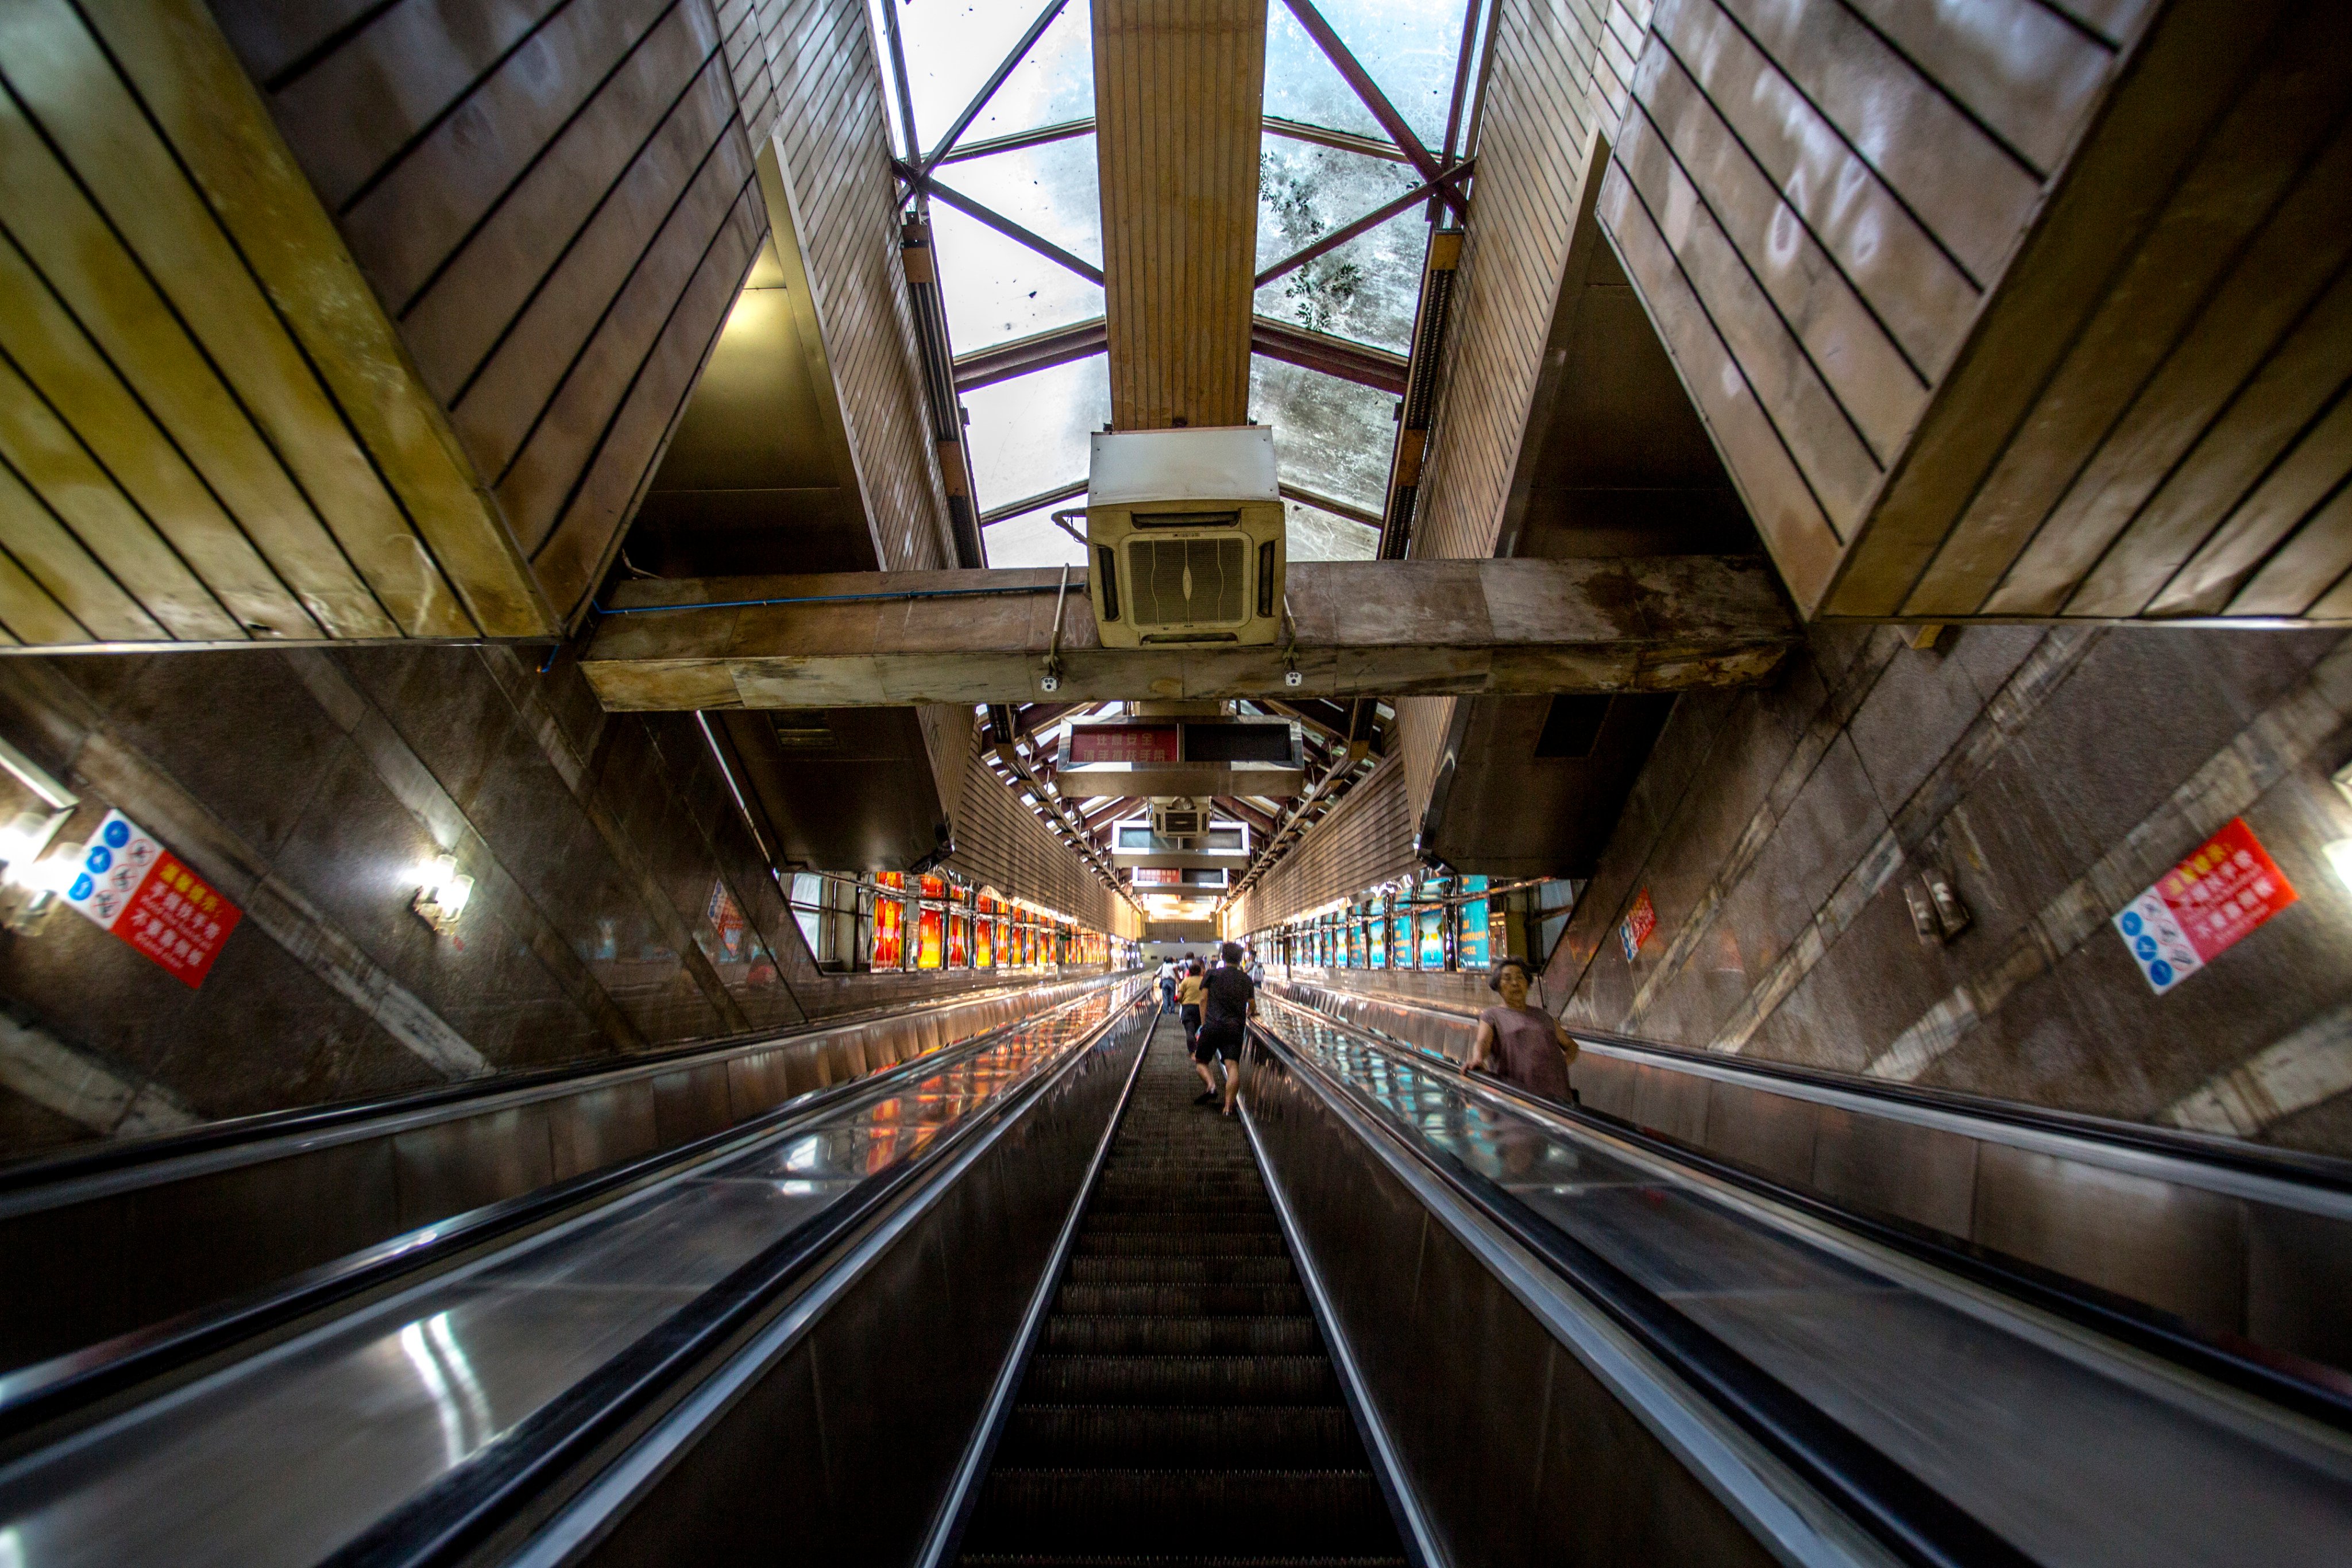 The Huangguan Escalator in Chongqing, in mainland China, is the longest single escalator in Asia, at 112 metres, but falls well short of the world’s three joint-longest, all in St. Petersburg, Russia. A new escalator being built at Malaysia’s Batu Caves will be one of Asia’s longest. Photo: Getty Images